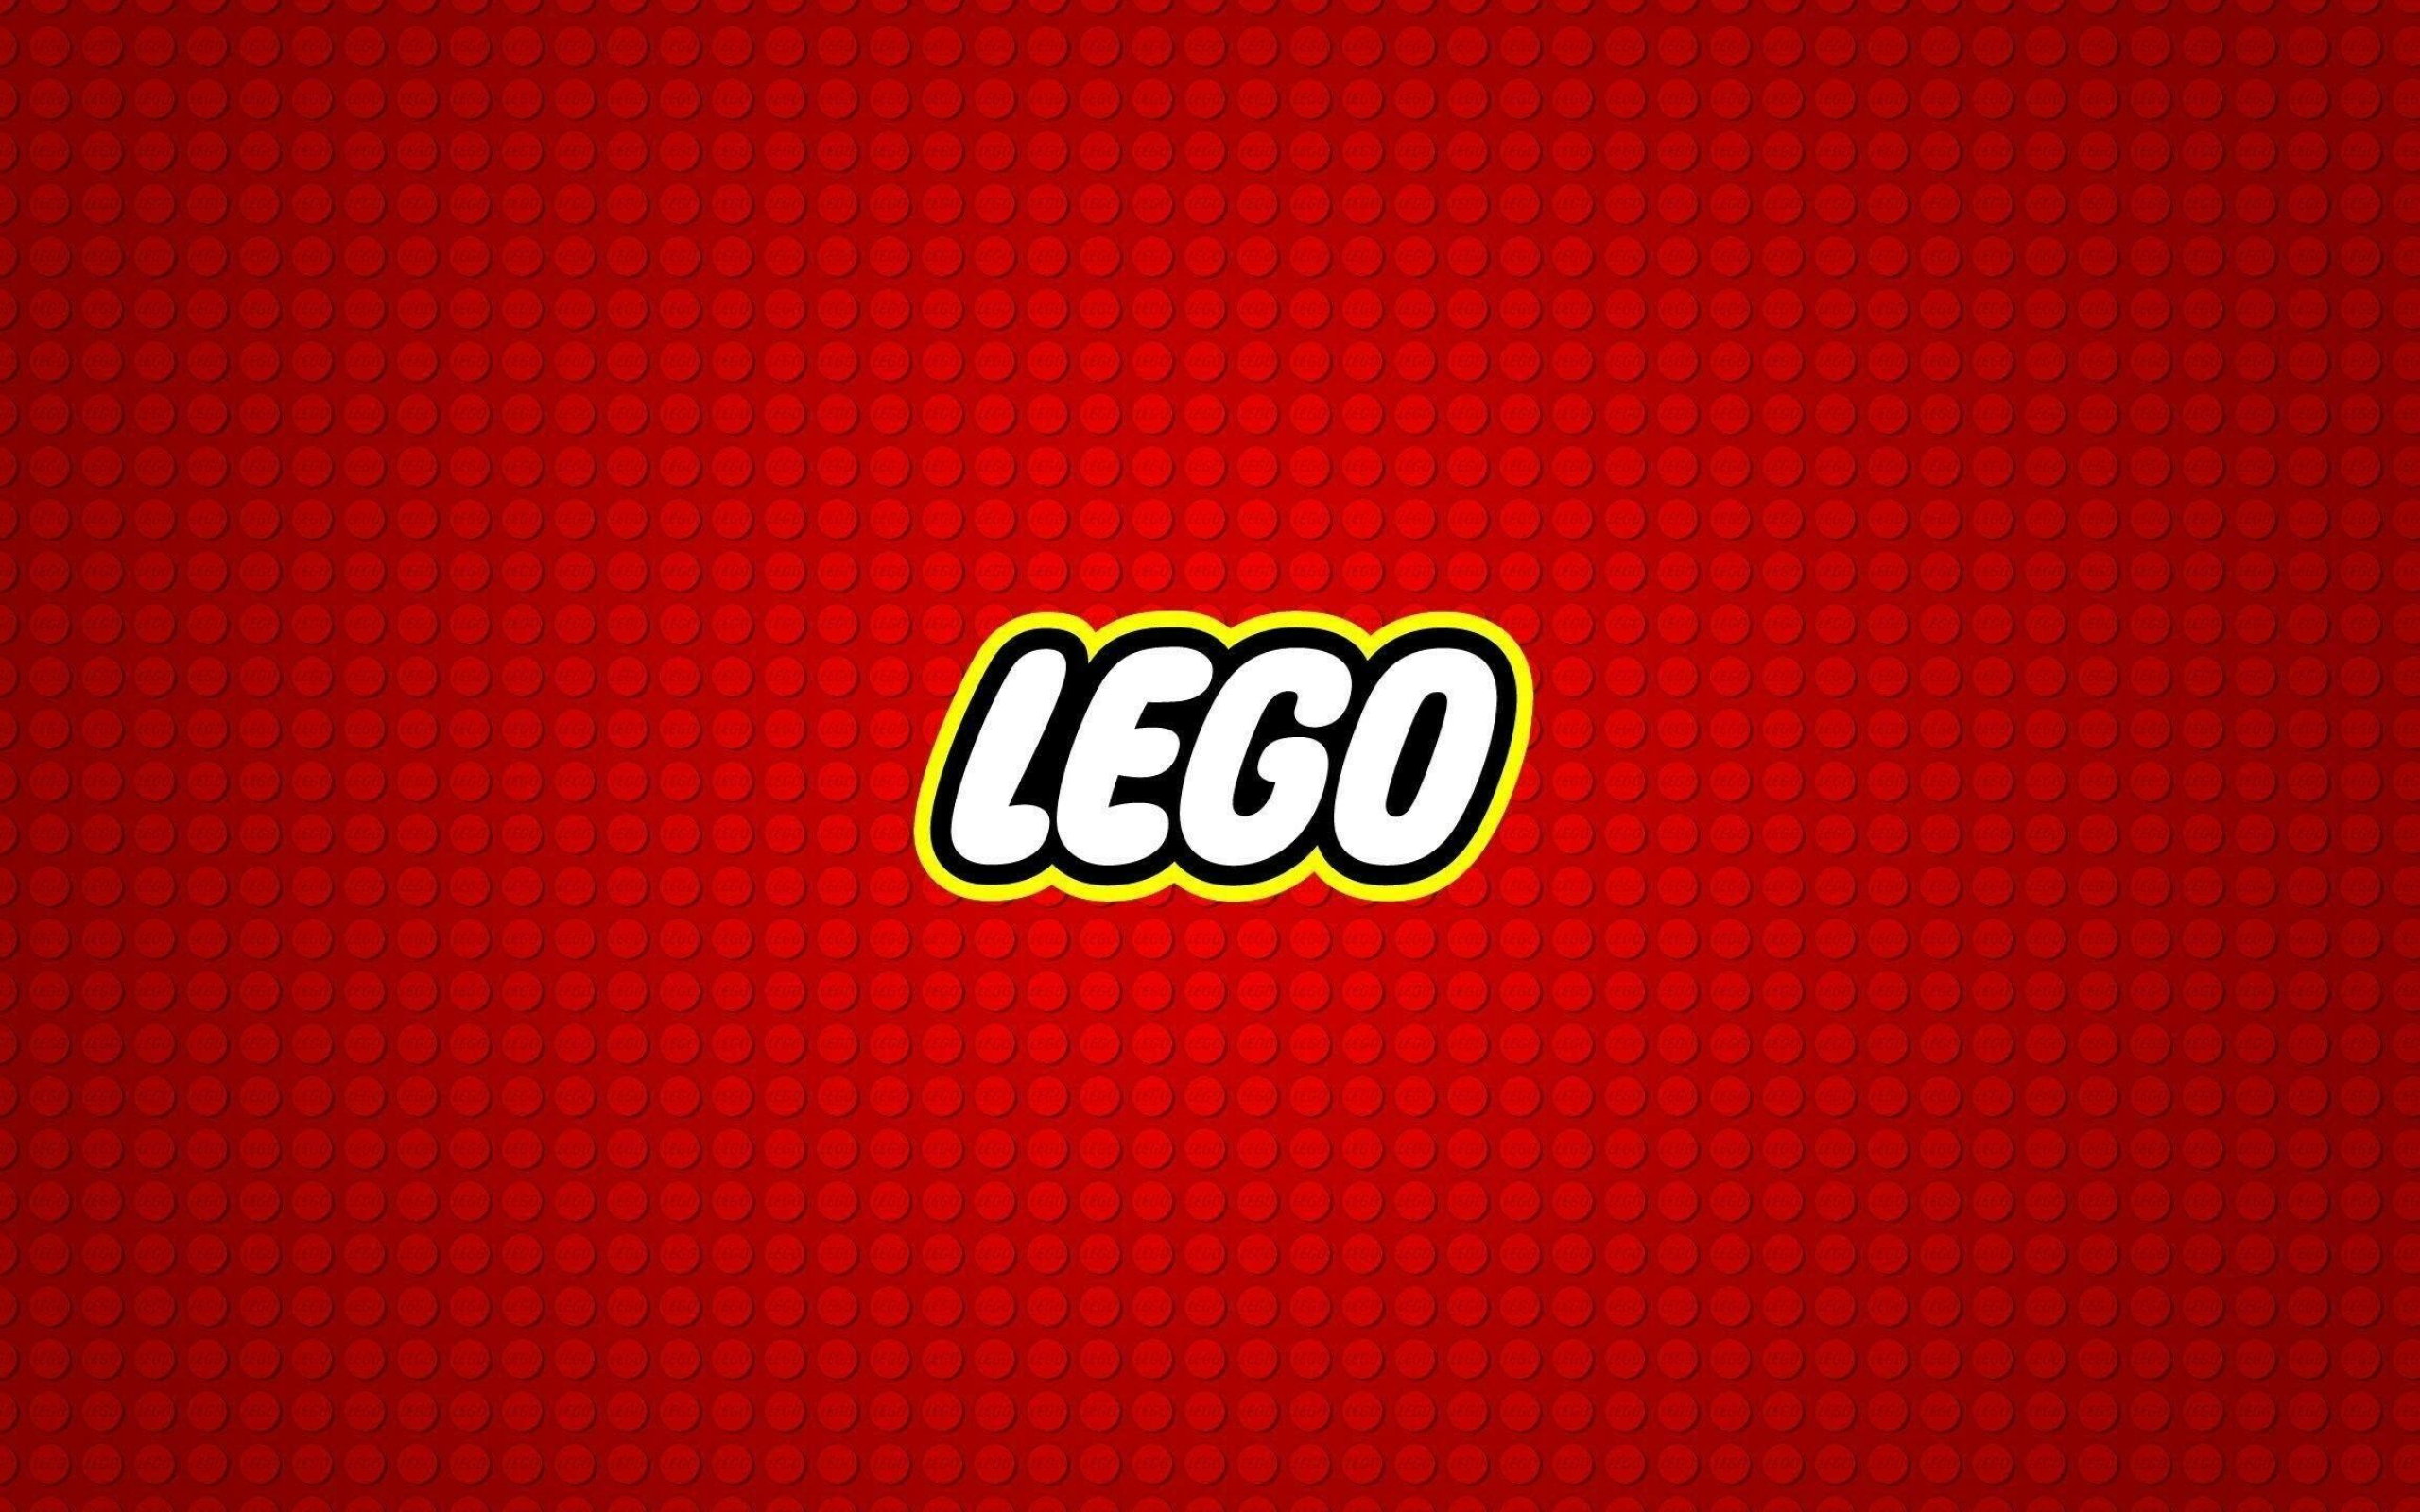 Lego: Sets come with instructions that help users through building the set. 2560x1600 HD Wallpaper.